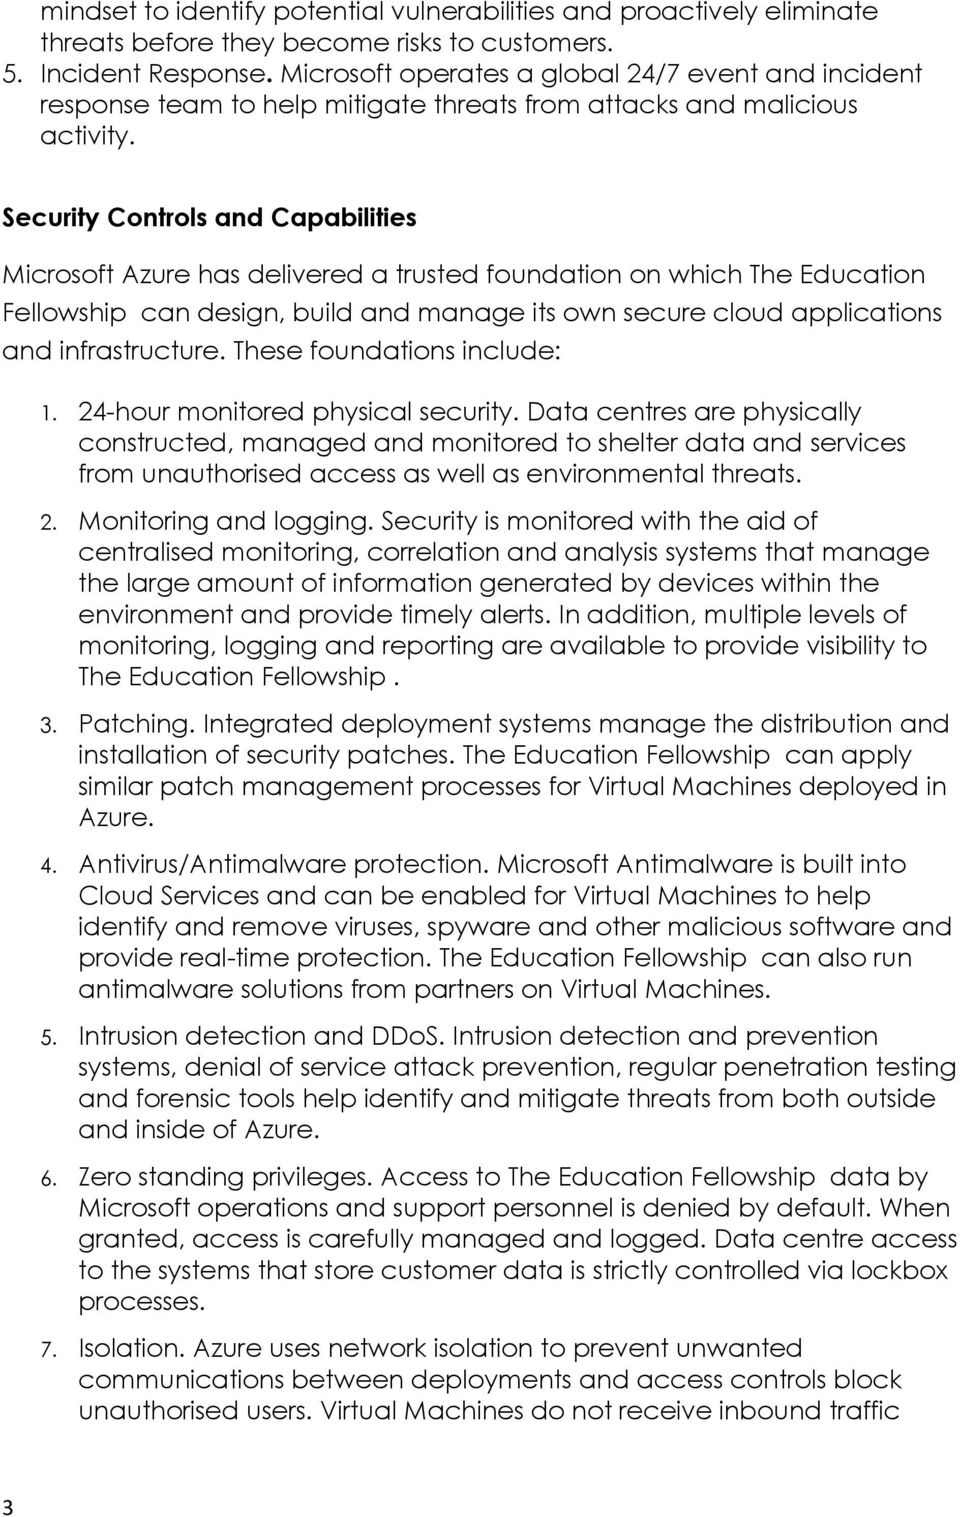 Security Controls and Capabilities Microsoft Azure has delivered a trusted foundation on which The Education Fellowship can design, build and manage its own secure cloud applications and